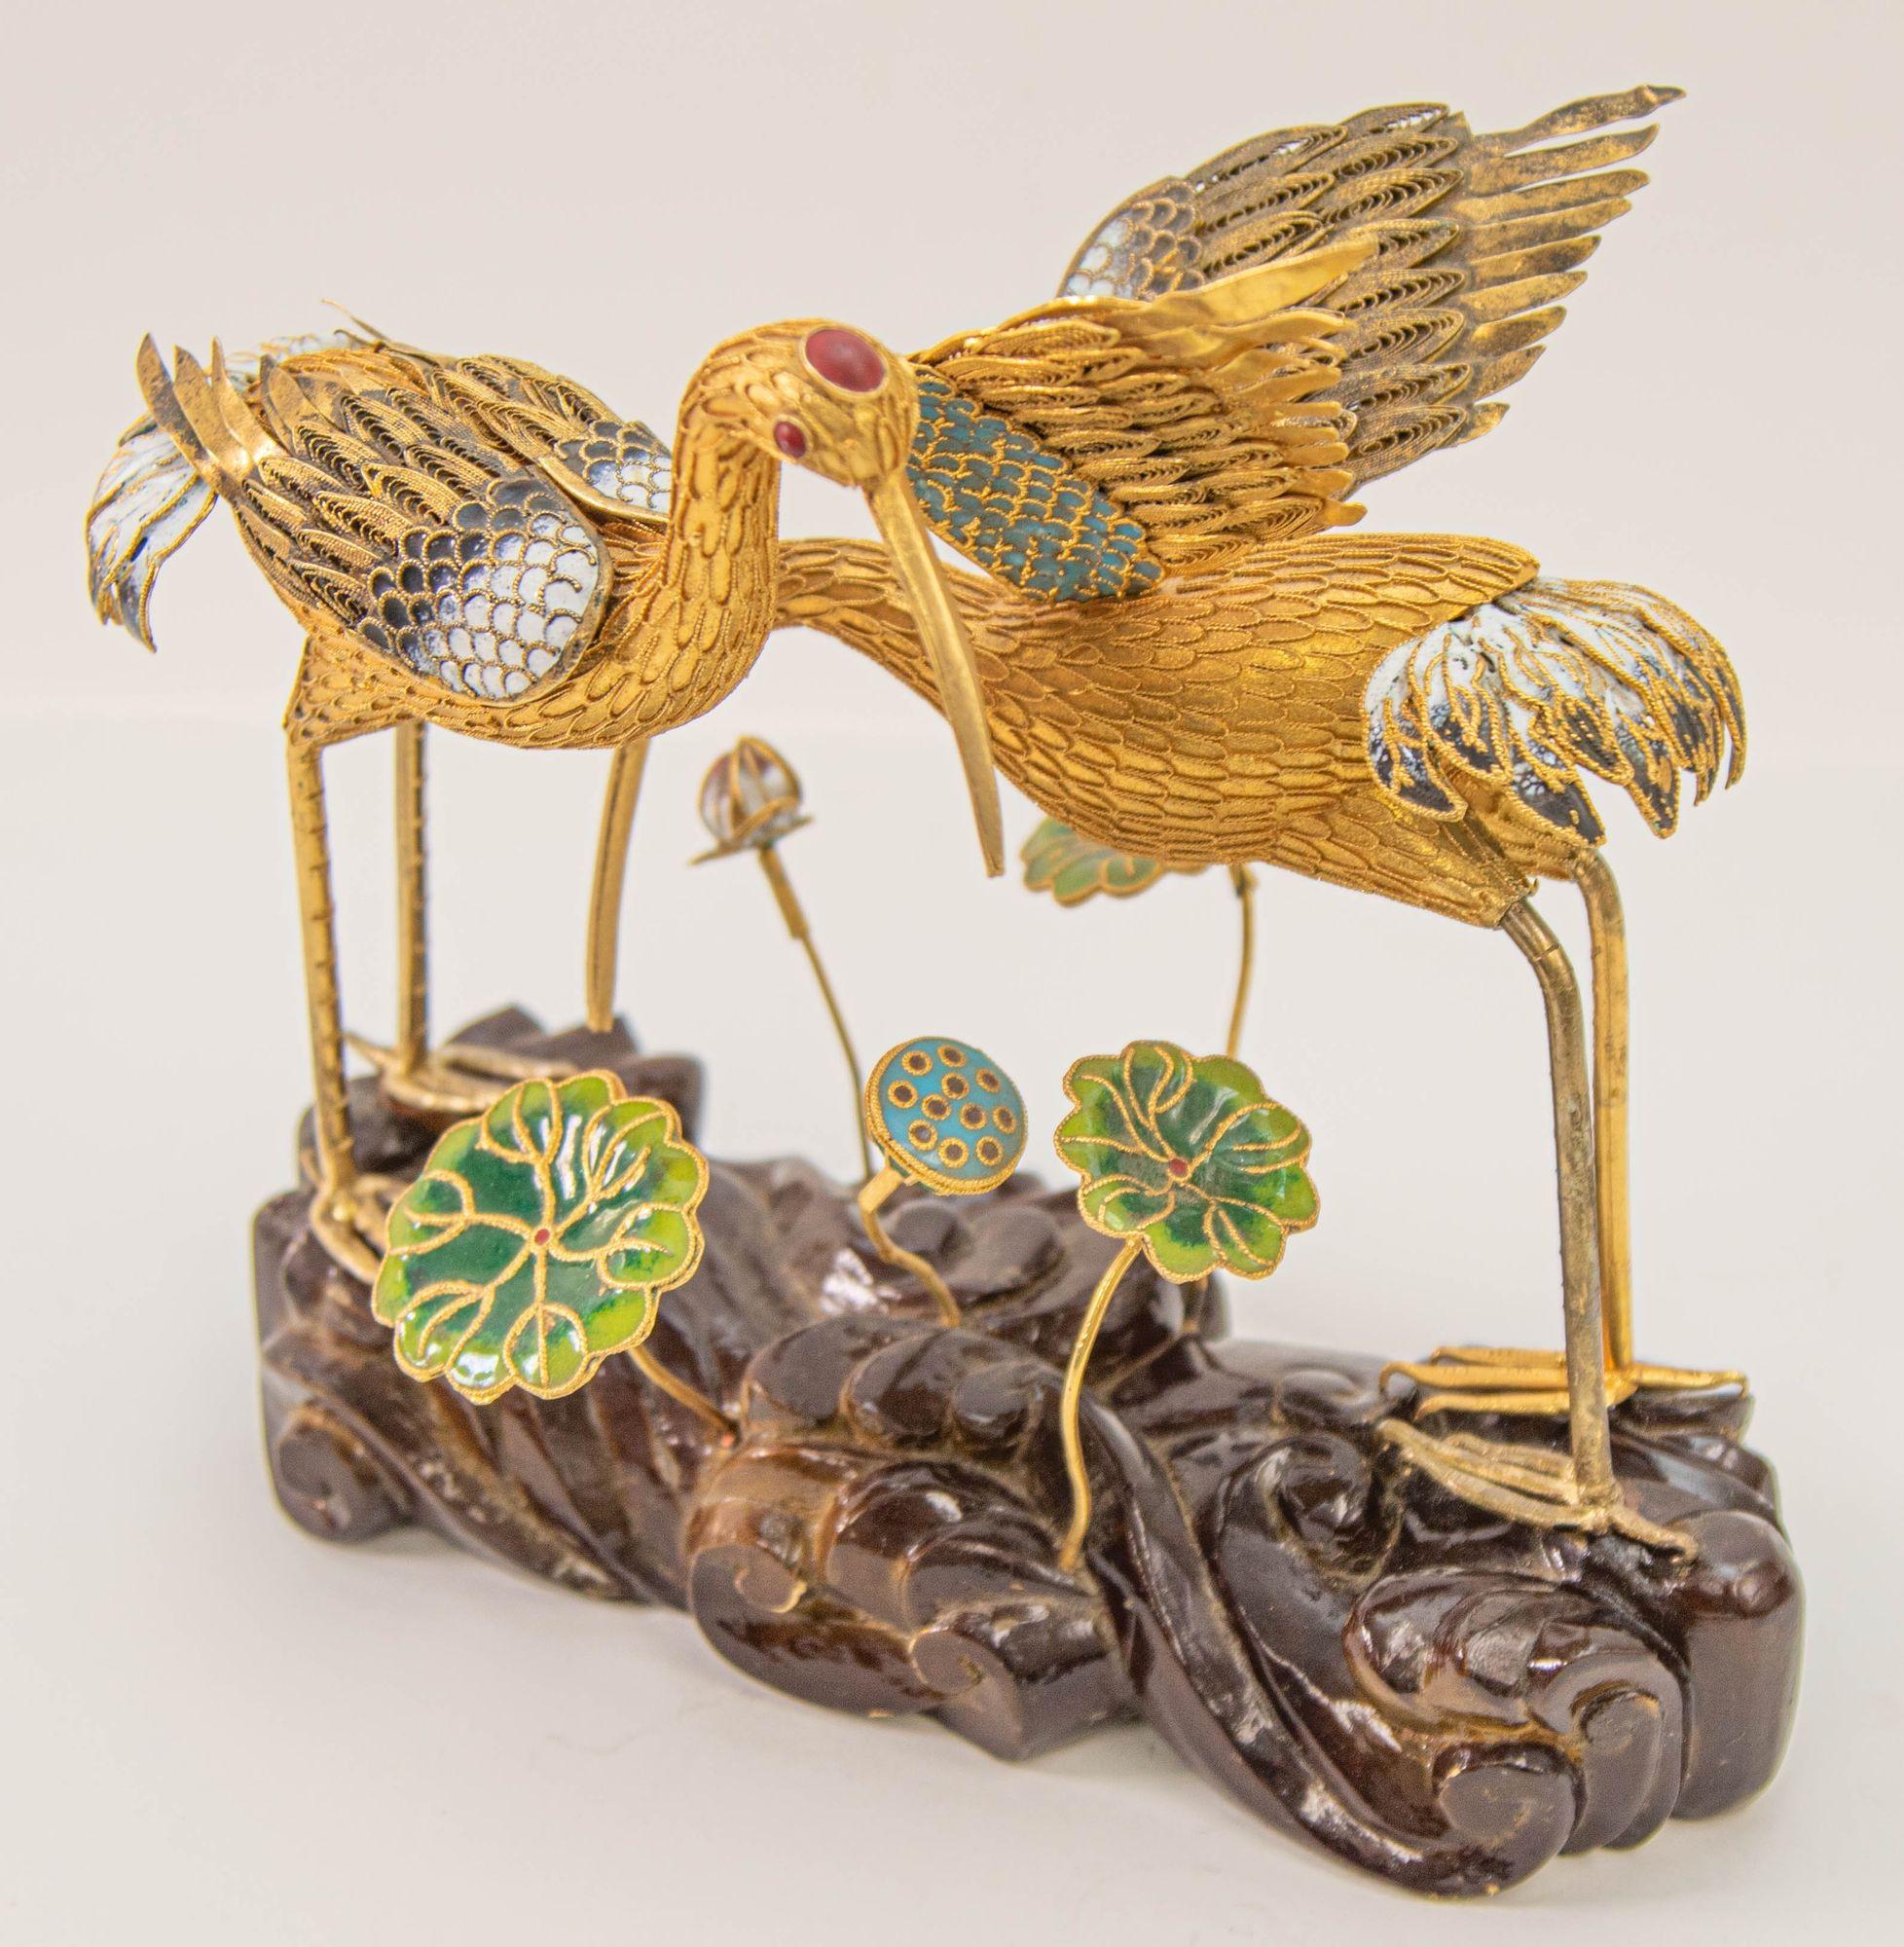 Vintage Chinese Metal Gilt Filigree and Enamel Cranes Figures on Wooden Stand For Sale 9